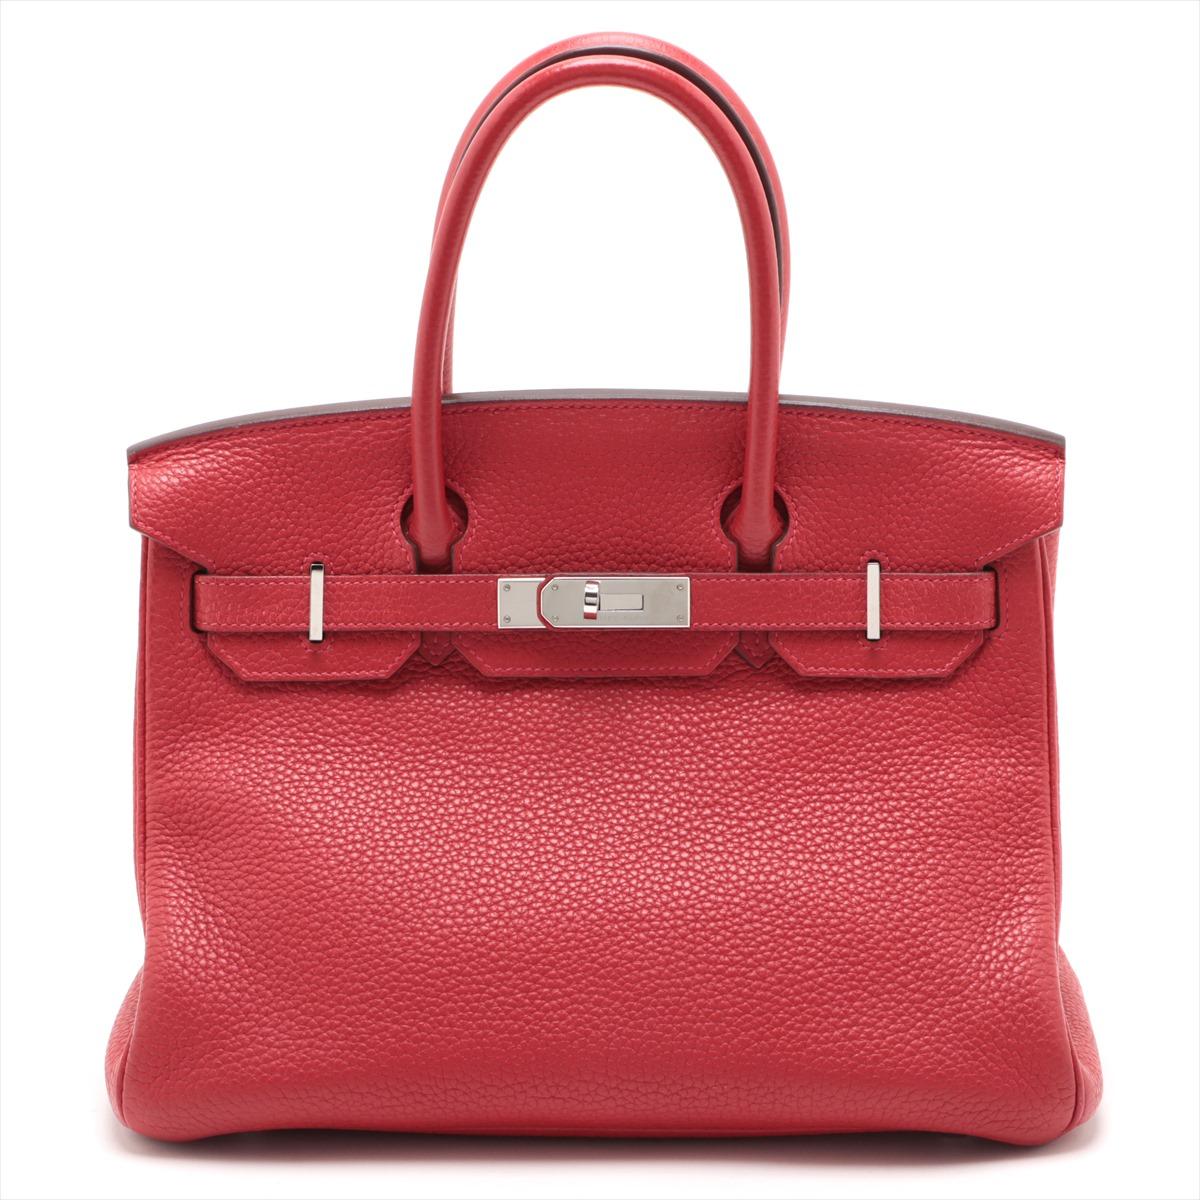 The Hermes Birkin 30 Taurillon Clemence Rouge is a luxurious embodiment of timeless elegance and unparalleled craftsmanship. Crafted from exquisite Taurillon Clemence leather in a striking shade of Rouge, the iconic handbag exudes sophistication and